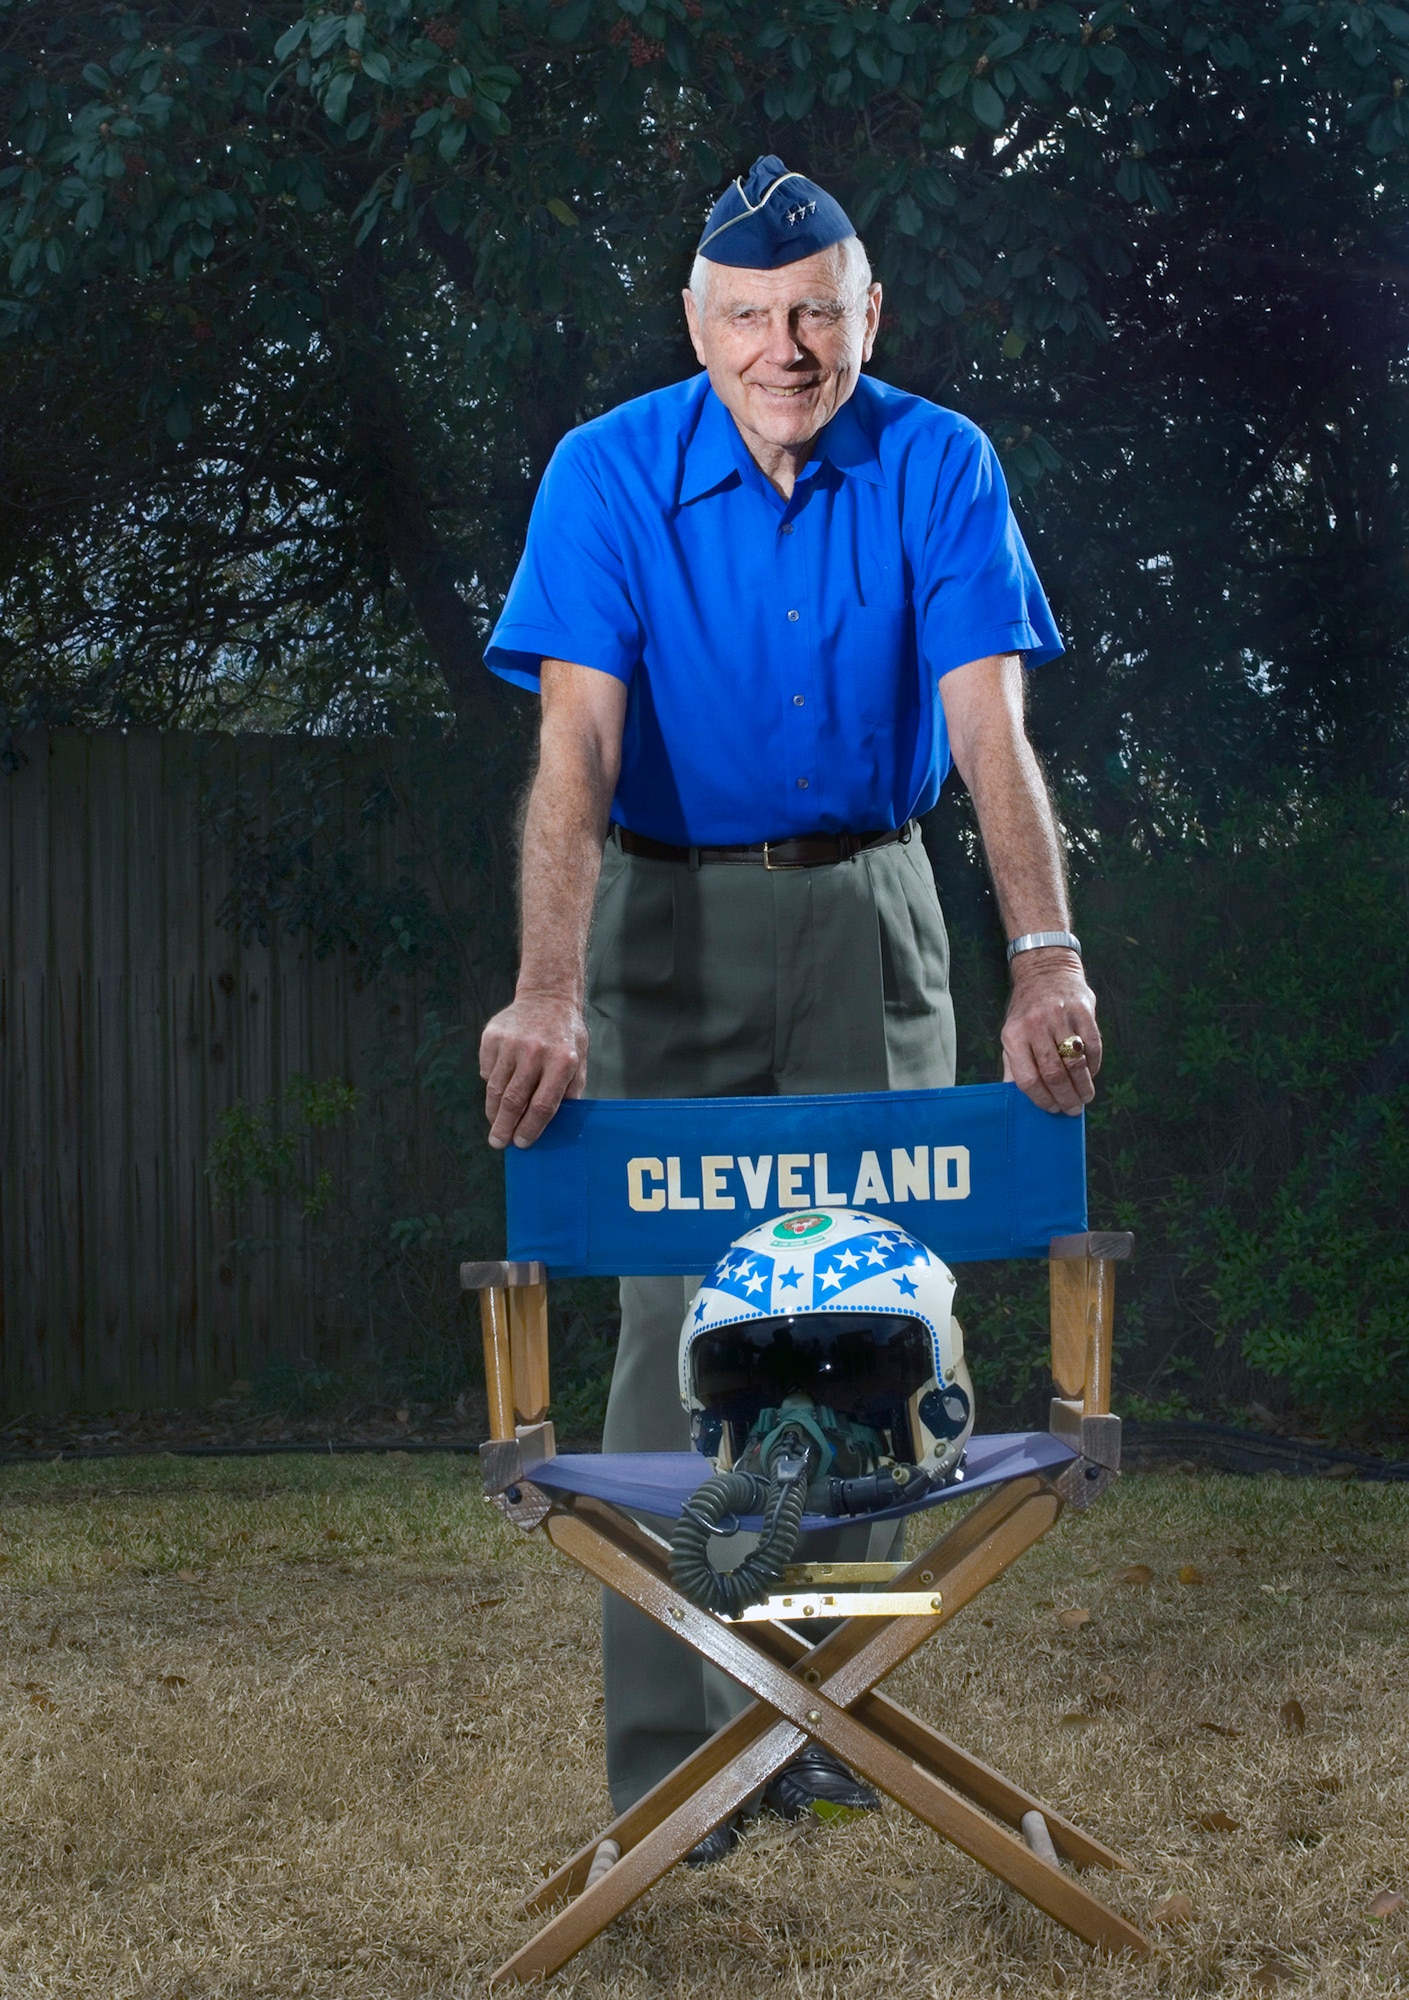 Retired Lt. Gen. Charles G. Cleveland stands in his backyard behind a director's chair presented to him as a gift for his time as the commander of the Air University at Maxwell Air Force Base, Ala. General Cleveland has been recognized by the Air Force as a jet fighter ace 55 years after the end of the Korean War. Newly discovered documentation by the Russian air force as well as eyewitness accounts by General Cleveland's wingmen proved evidence to support converting two probable kills into confirmed kills from dog fights over "Mig Alley" during the Korean War. General Cleveland was deployed to South Korea in March 1952, where he flew F-86s as a flight commander with the 4th Fighter Interceptor Wing at Kimpo Air Base. (U.S. Air Force photo/Staff Sgt. Bennie J. Davis III)
